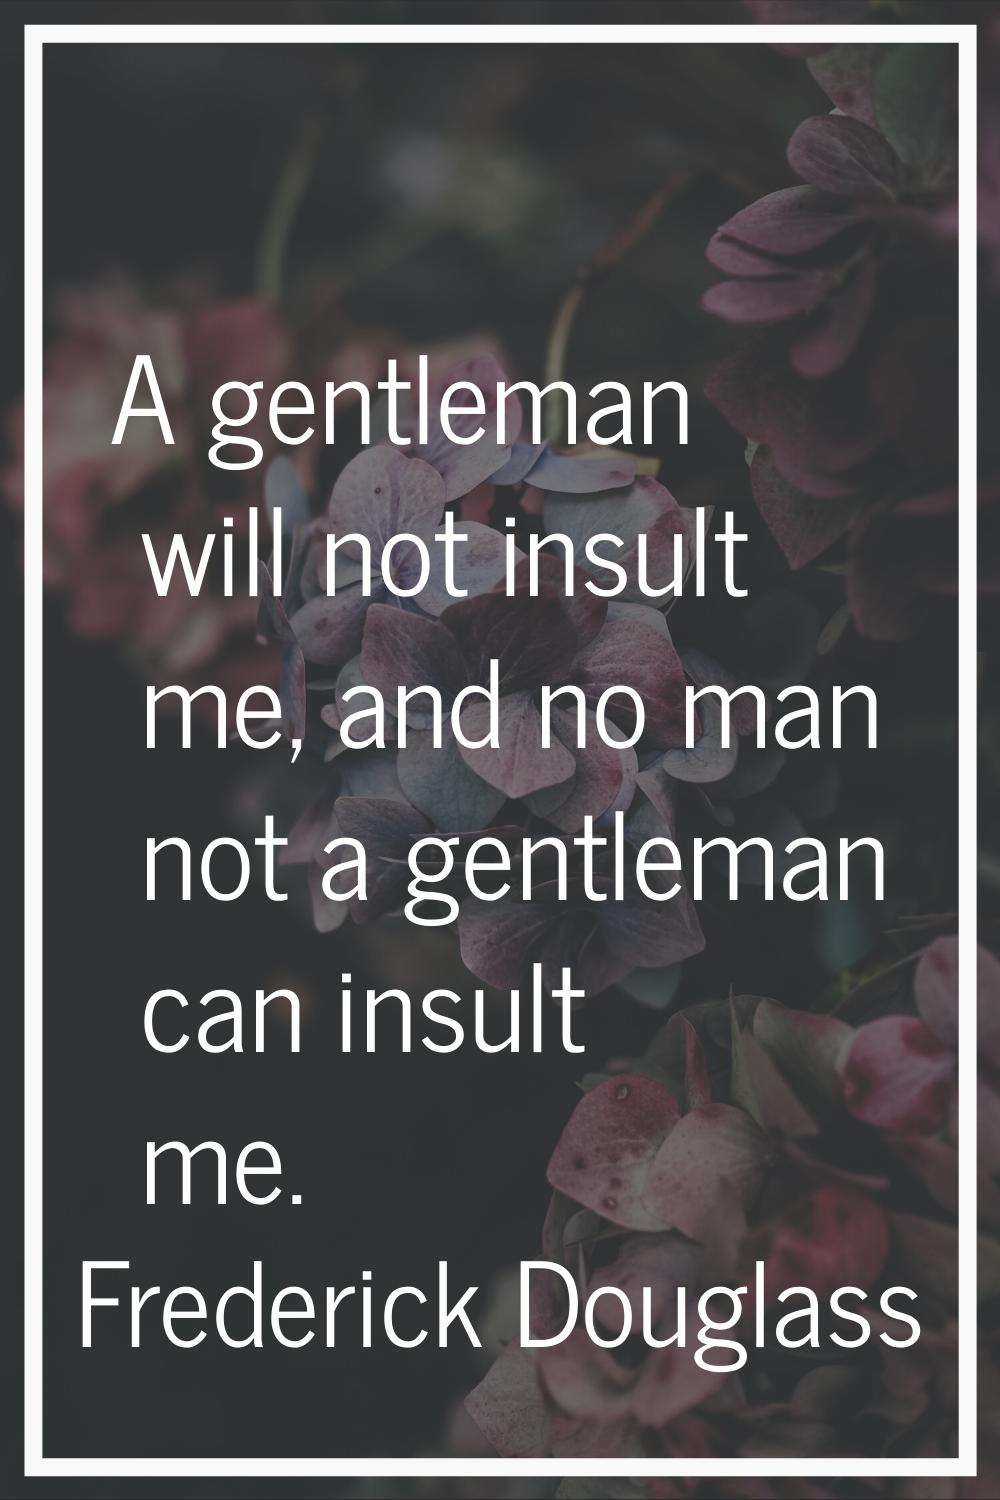 A gentleman will not insult me, and no man not a gentleman can insult me.